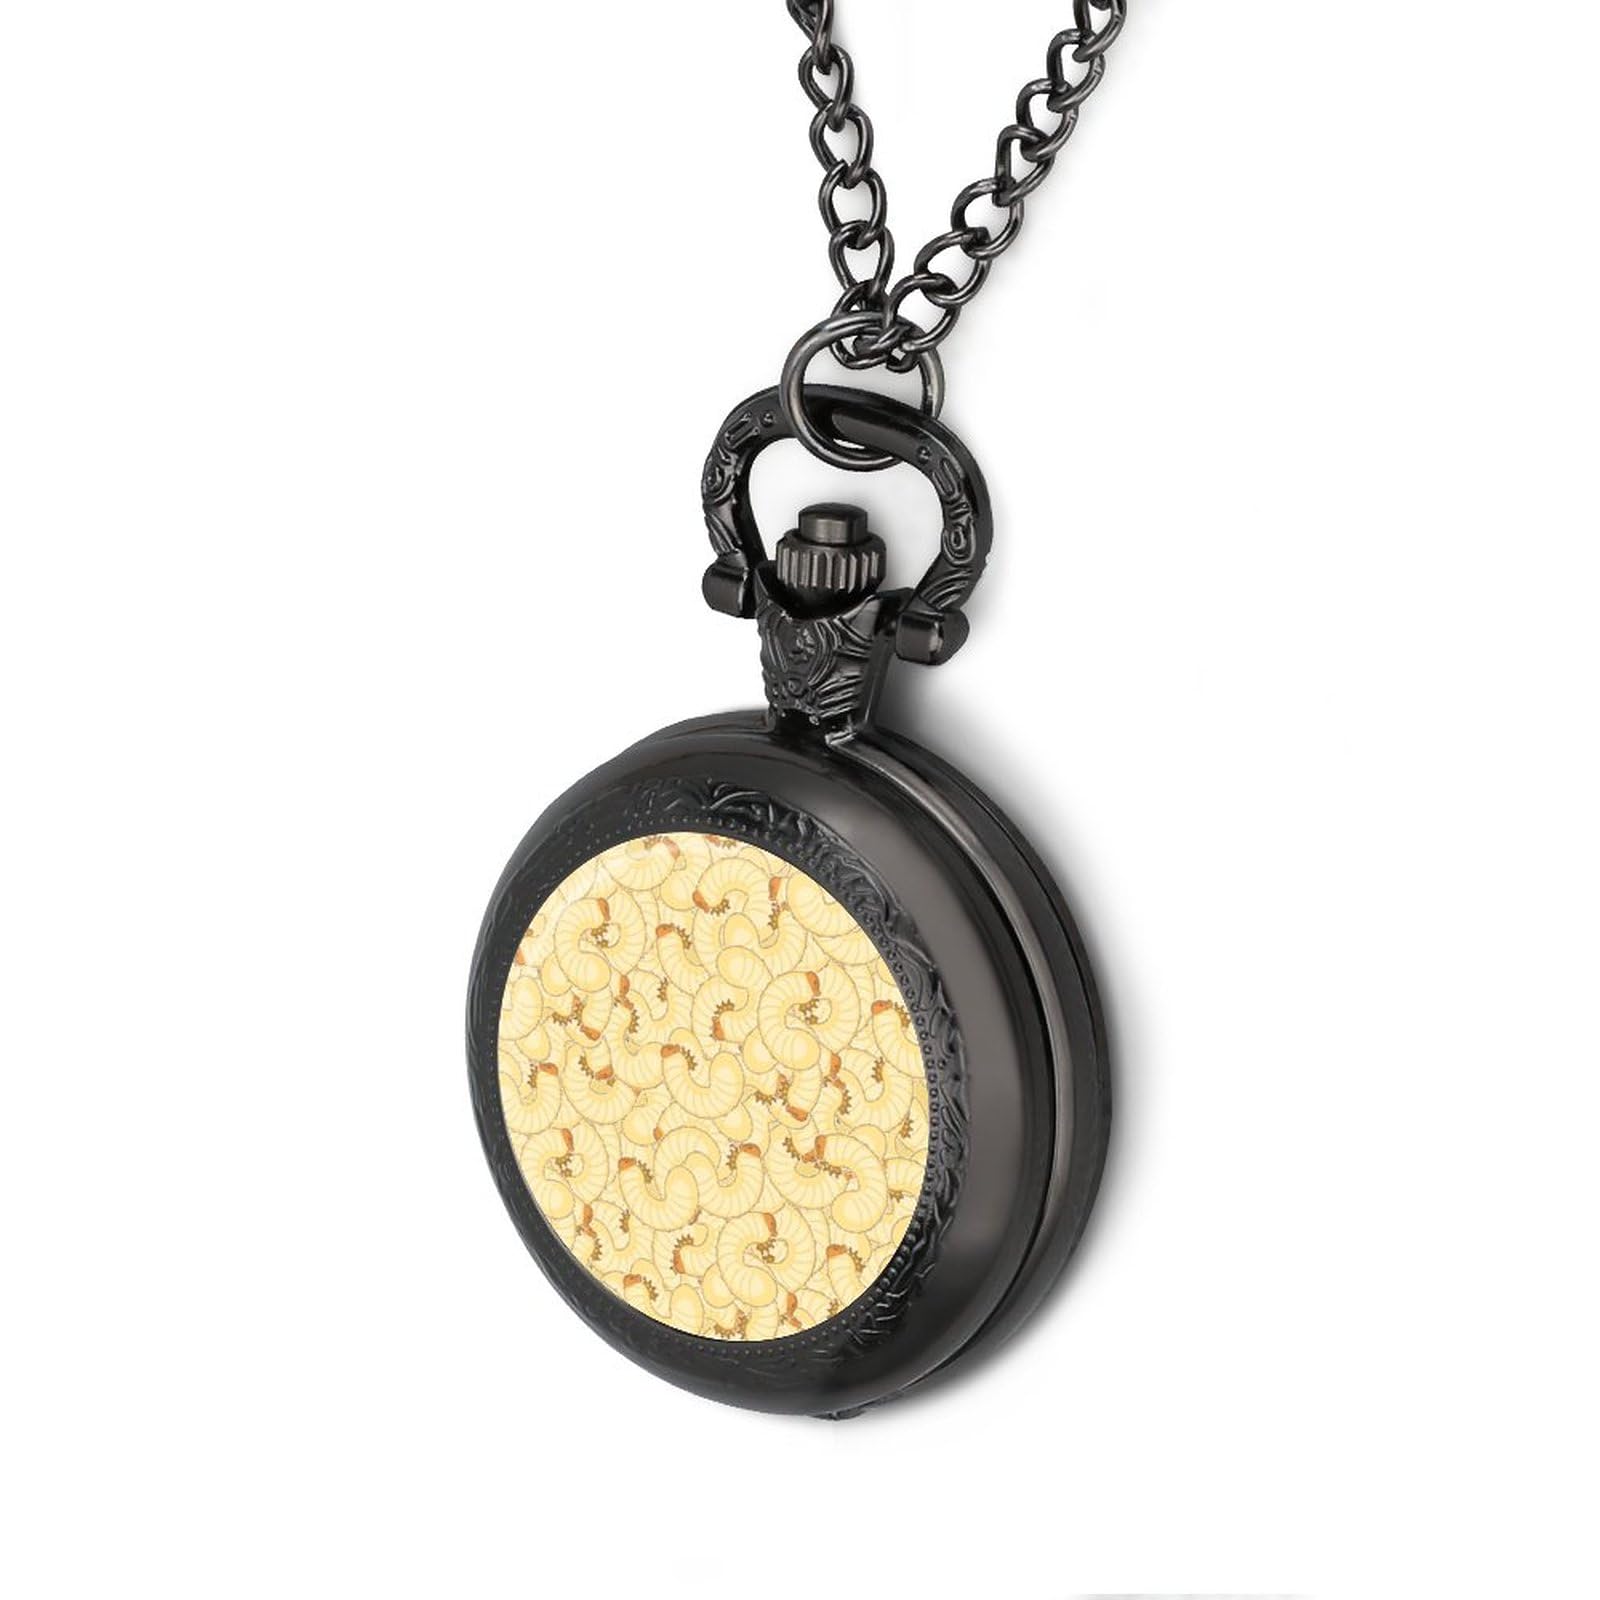 Maggot Beetle Larva Vintage Pocket Watches with Chain for Men Fathers Day Xmas Present Daily Use